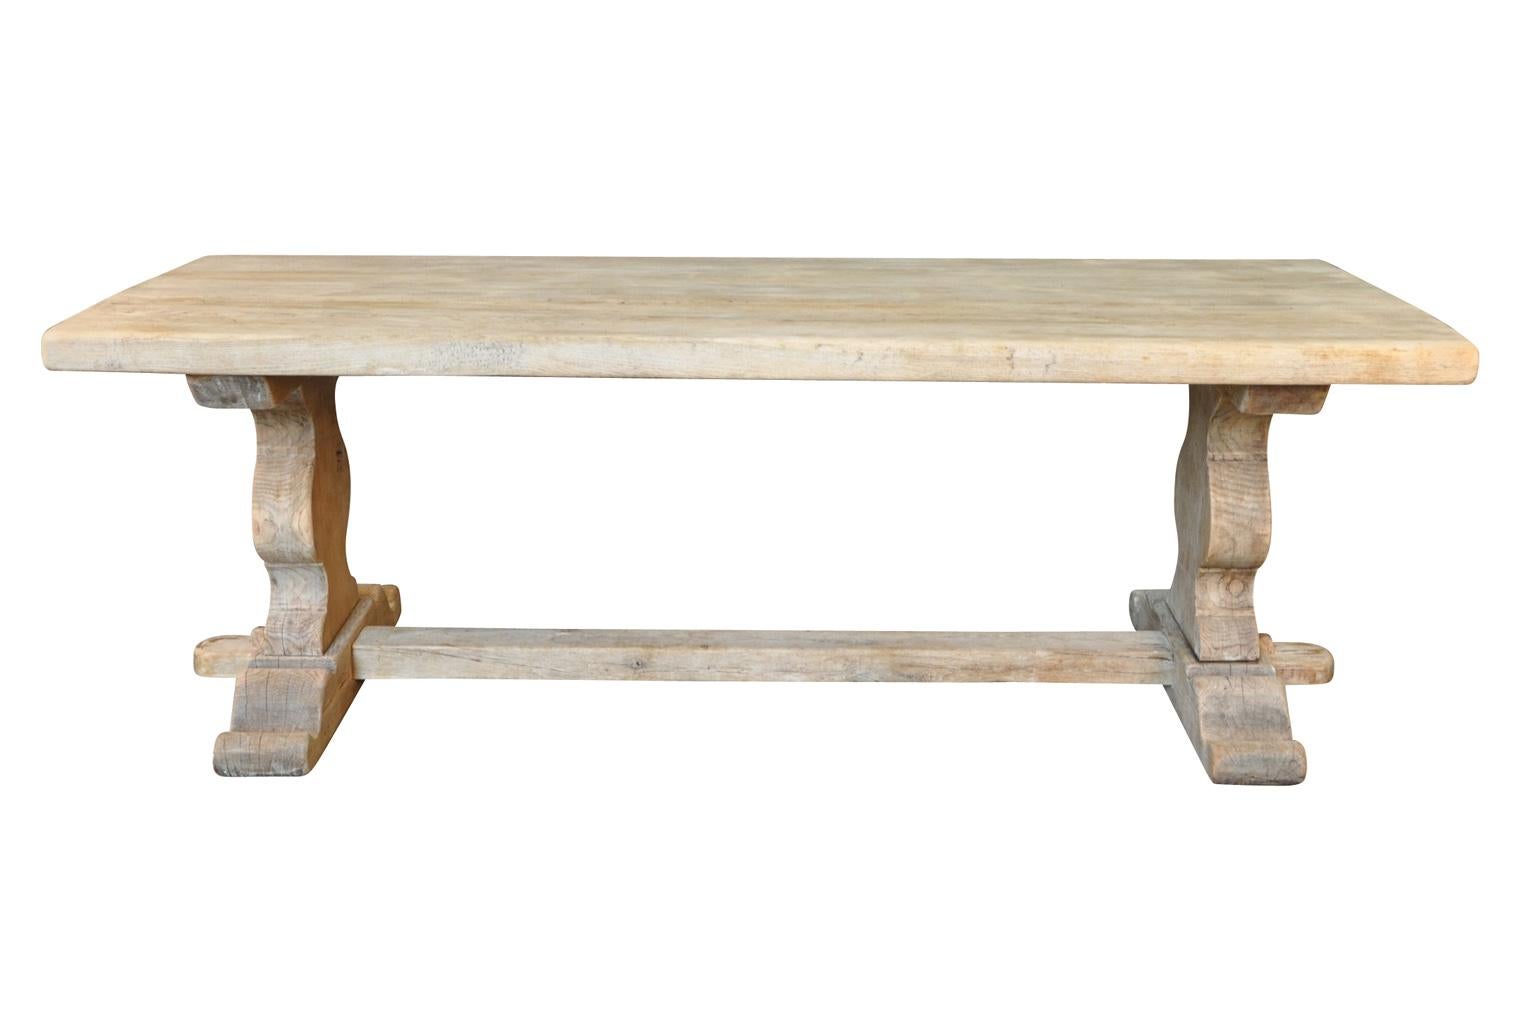 A very nice early 20th century farm table, trestle table from the Provence region of France. Soundly constructed from washed or bleached oak. Wonderful not only as a dining table, but as a large sofa table or writing desk.